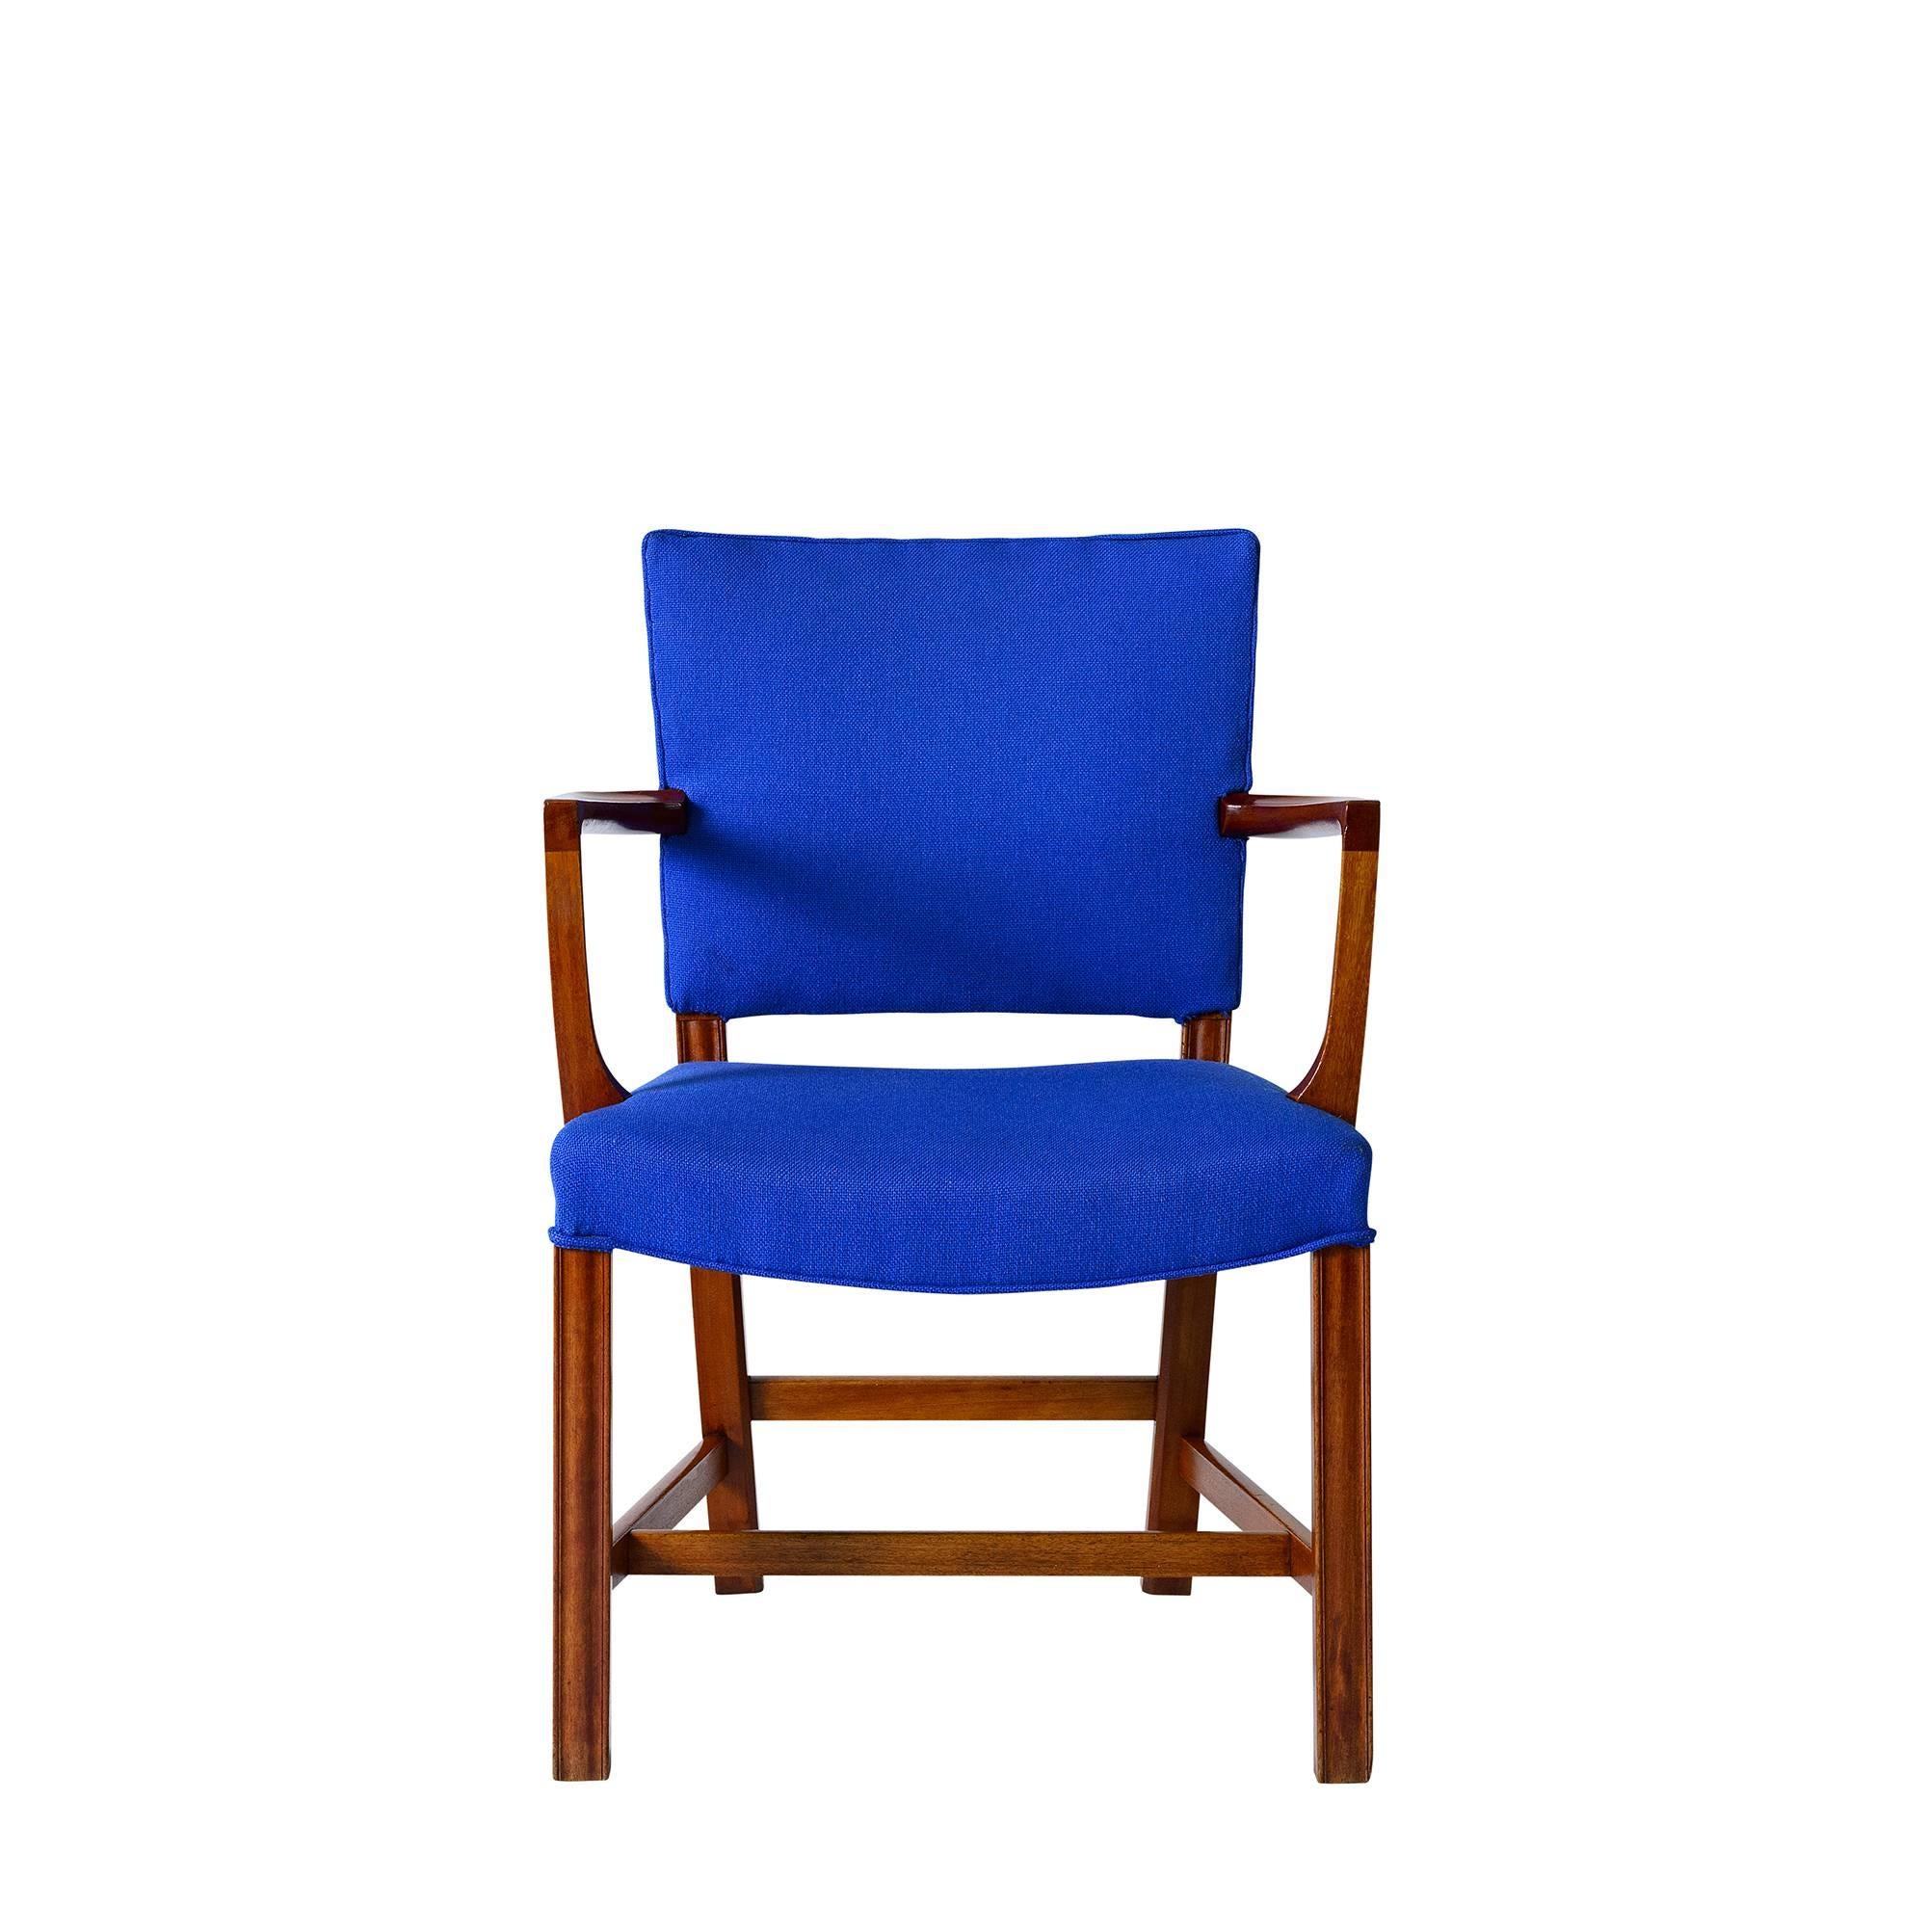 Set of Kaare Klint armchairs designed in 1927 and produced by Rud Rasmussen.